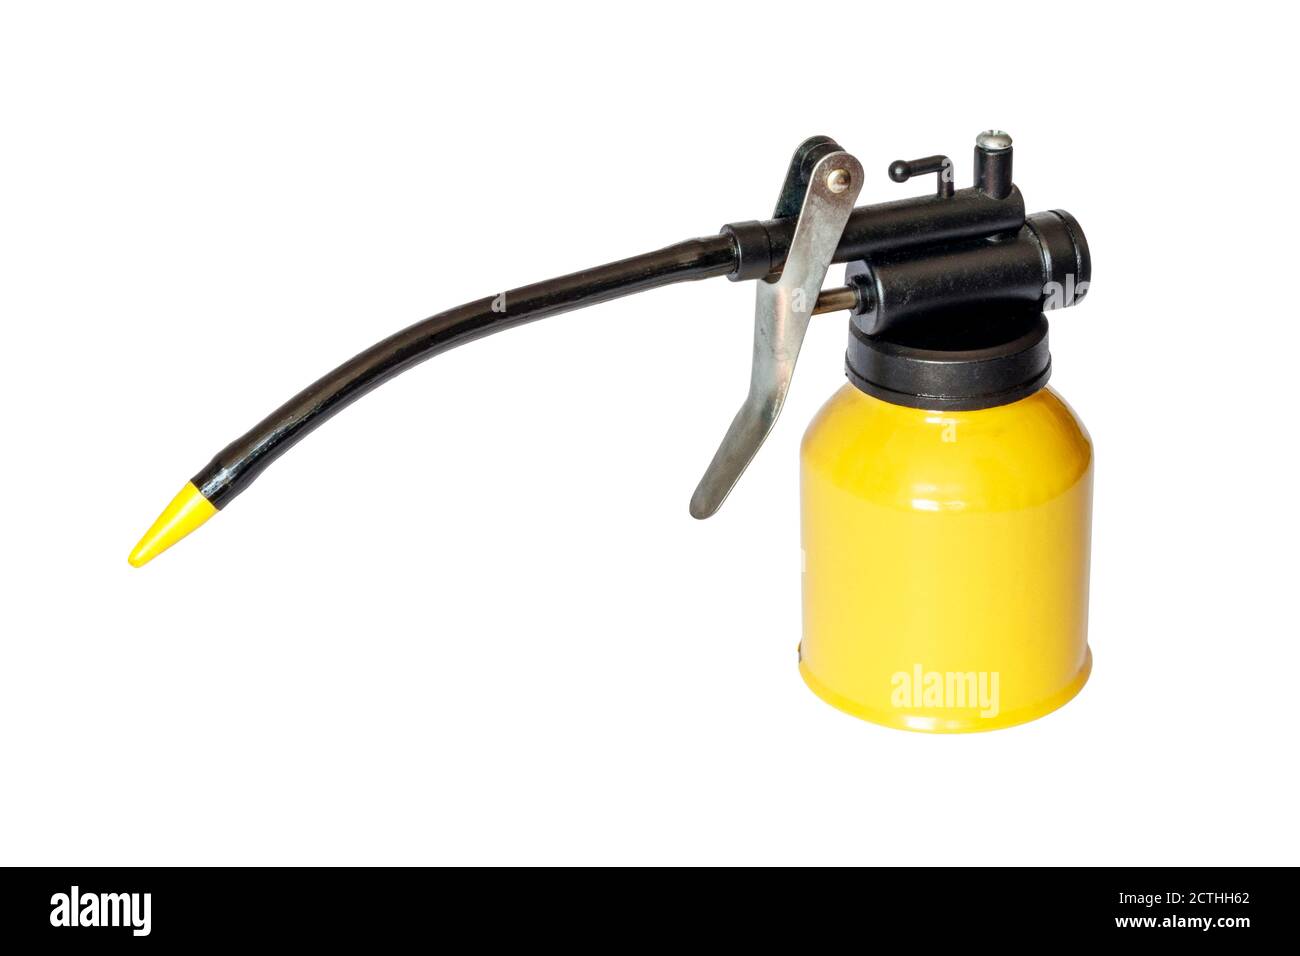 A yellow traditional pump-action oil can with a flexible spout, isolated on a white background Stock Photo